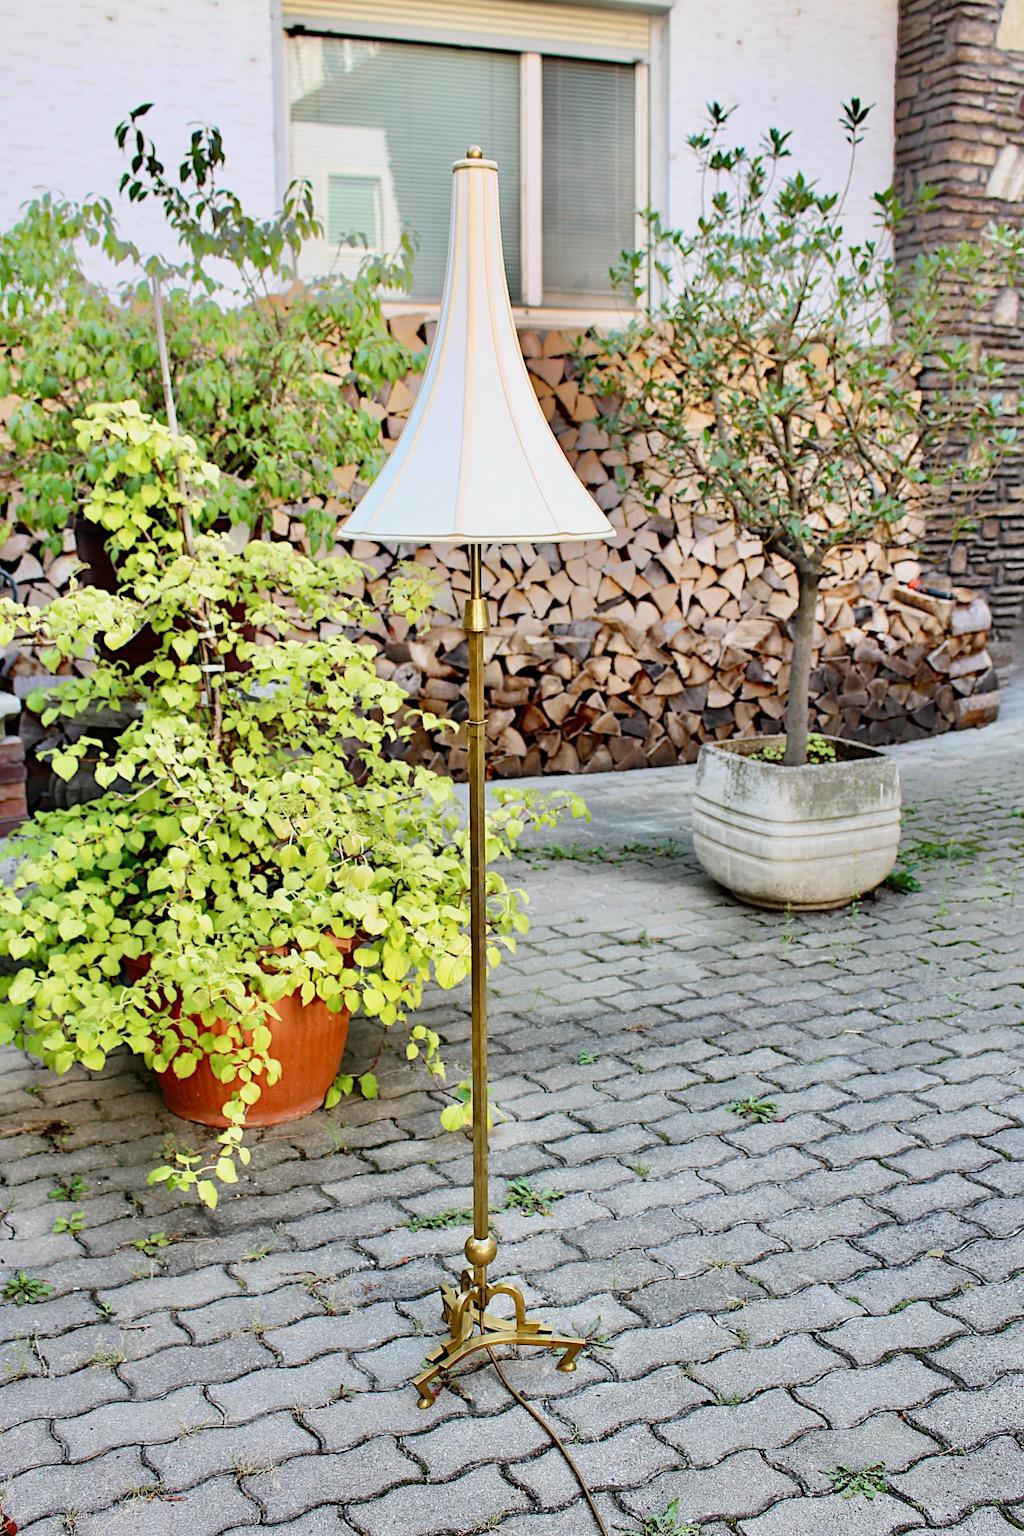 Art Deco vintage Dagobert Peche style pagoda floor lamp from solid brass 1920s Austria.
Outstanding Art Deco vintage floor lamp with beautiful chinoiserie elements. 
Such a beautiful and rare floor lamp never comes often around, probably an unique